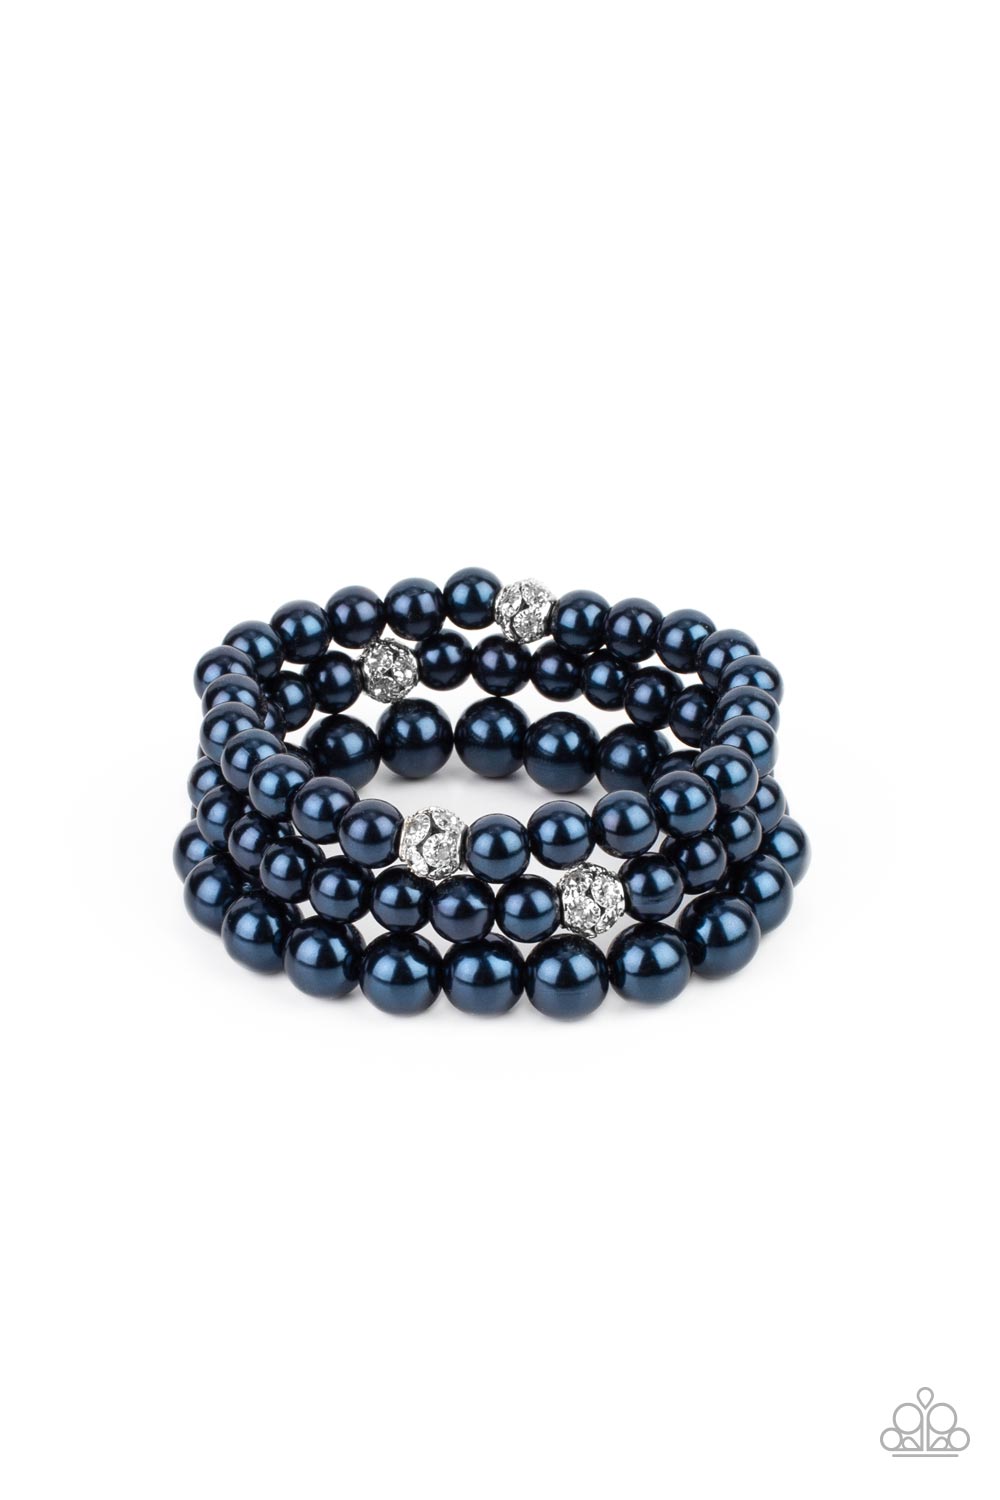 Here Comes The Heiress - Blue Bracelet - Paparazzi - Dare2bdazzlin N Jewelry